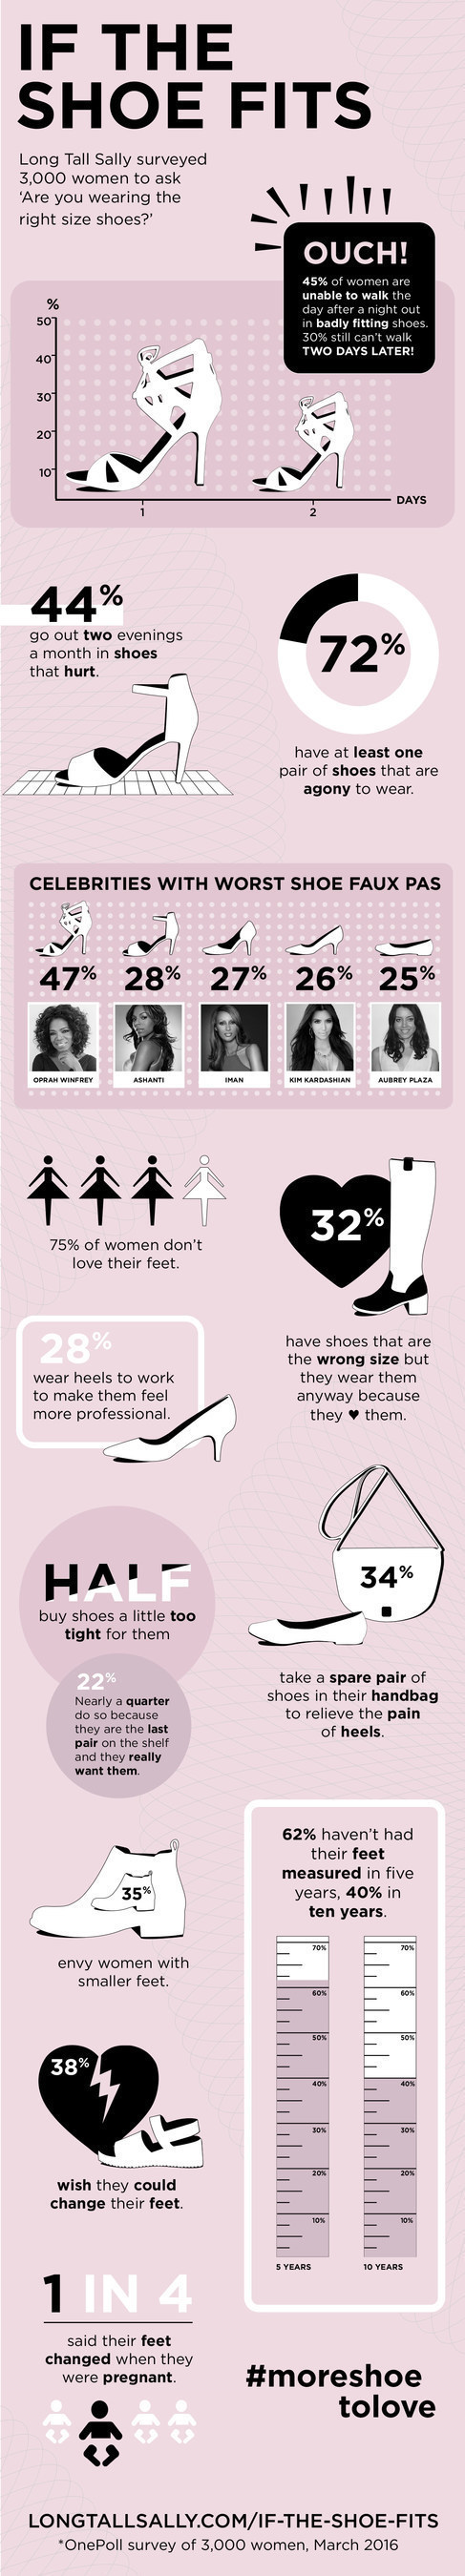 Long Tall Sally's "If the Shoe Fits" survey asked 3,000 women about their shoe-wearing habits. More details at http://us.longtallsally.com/if-the-shoe-fits.